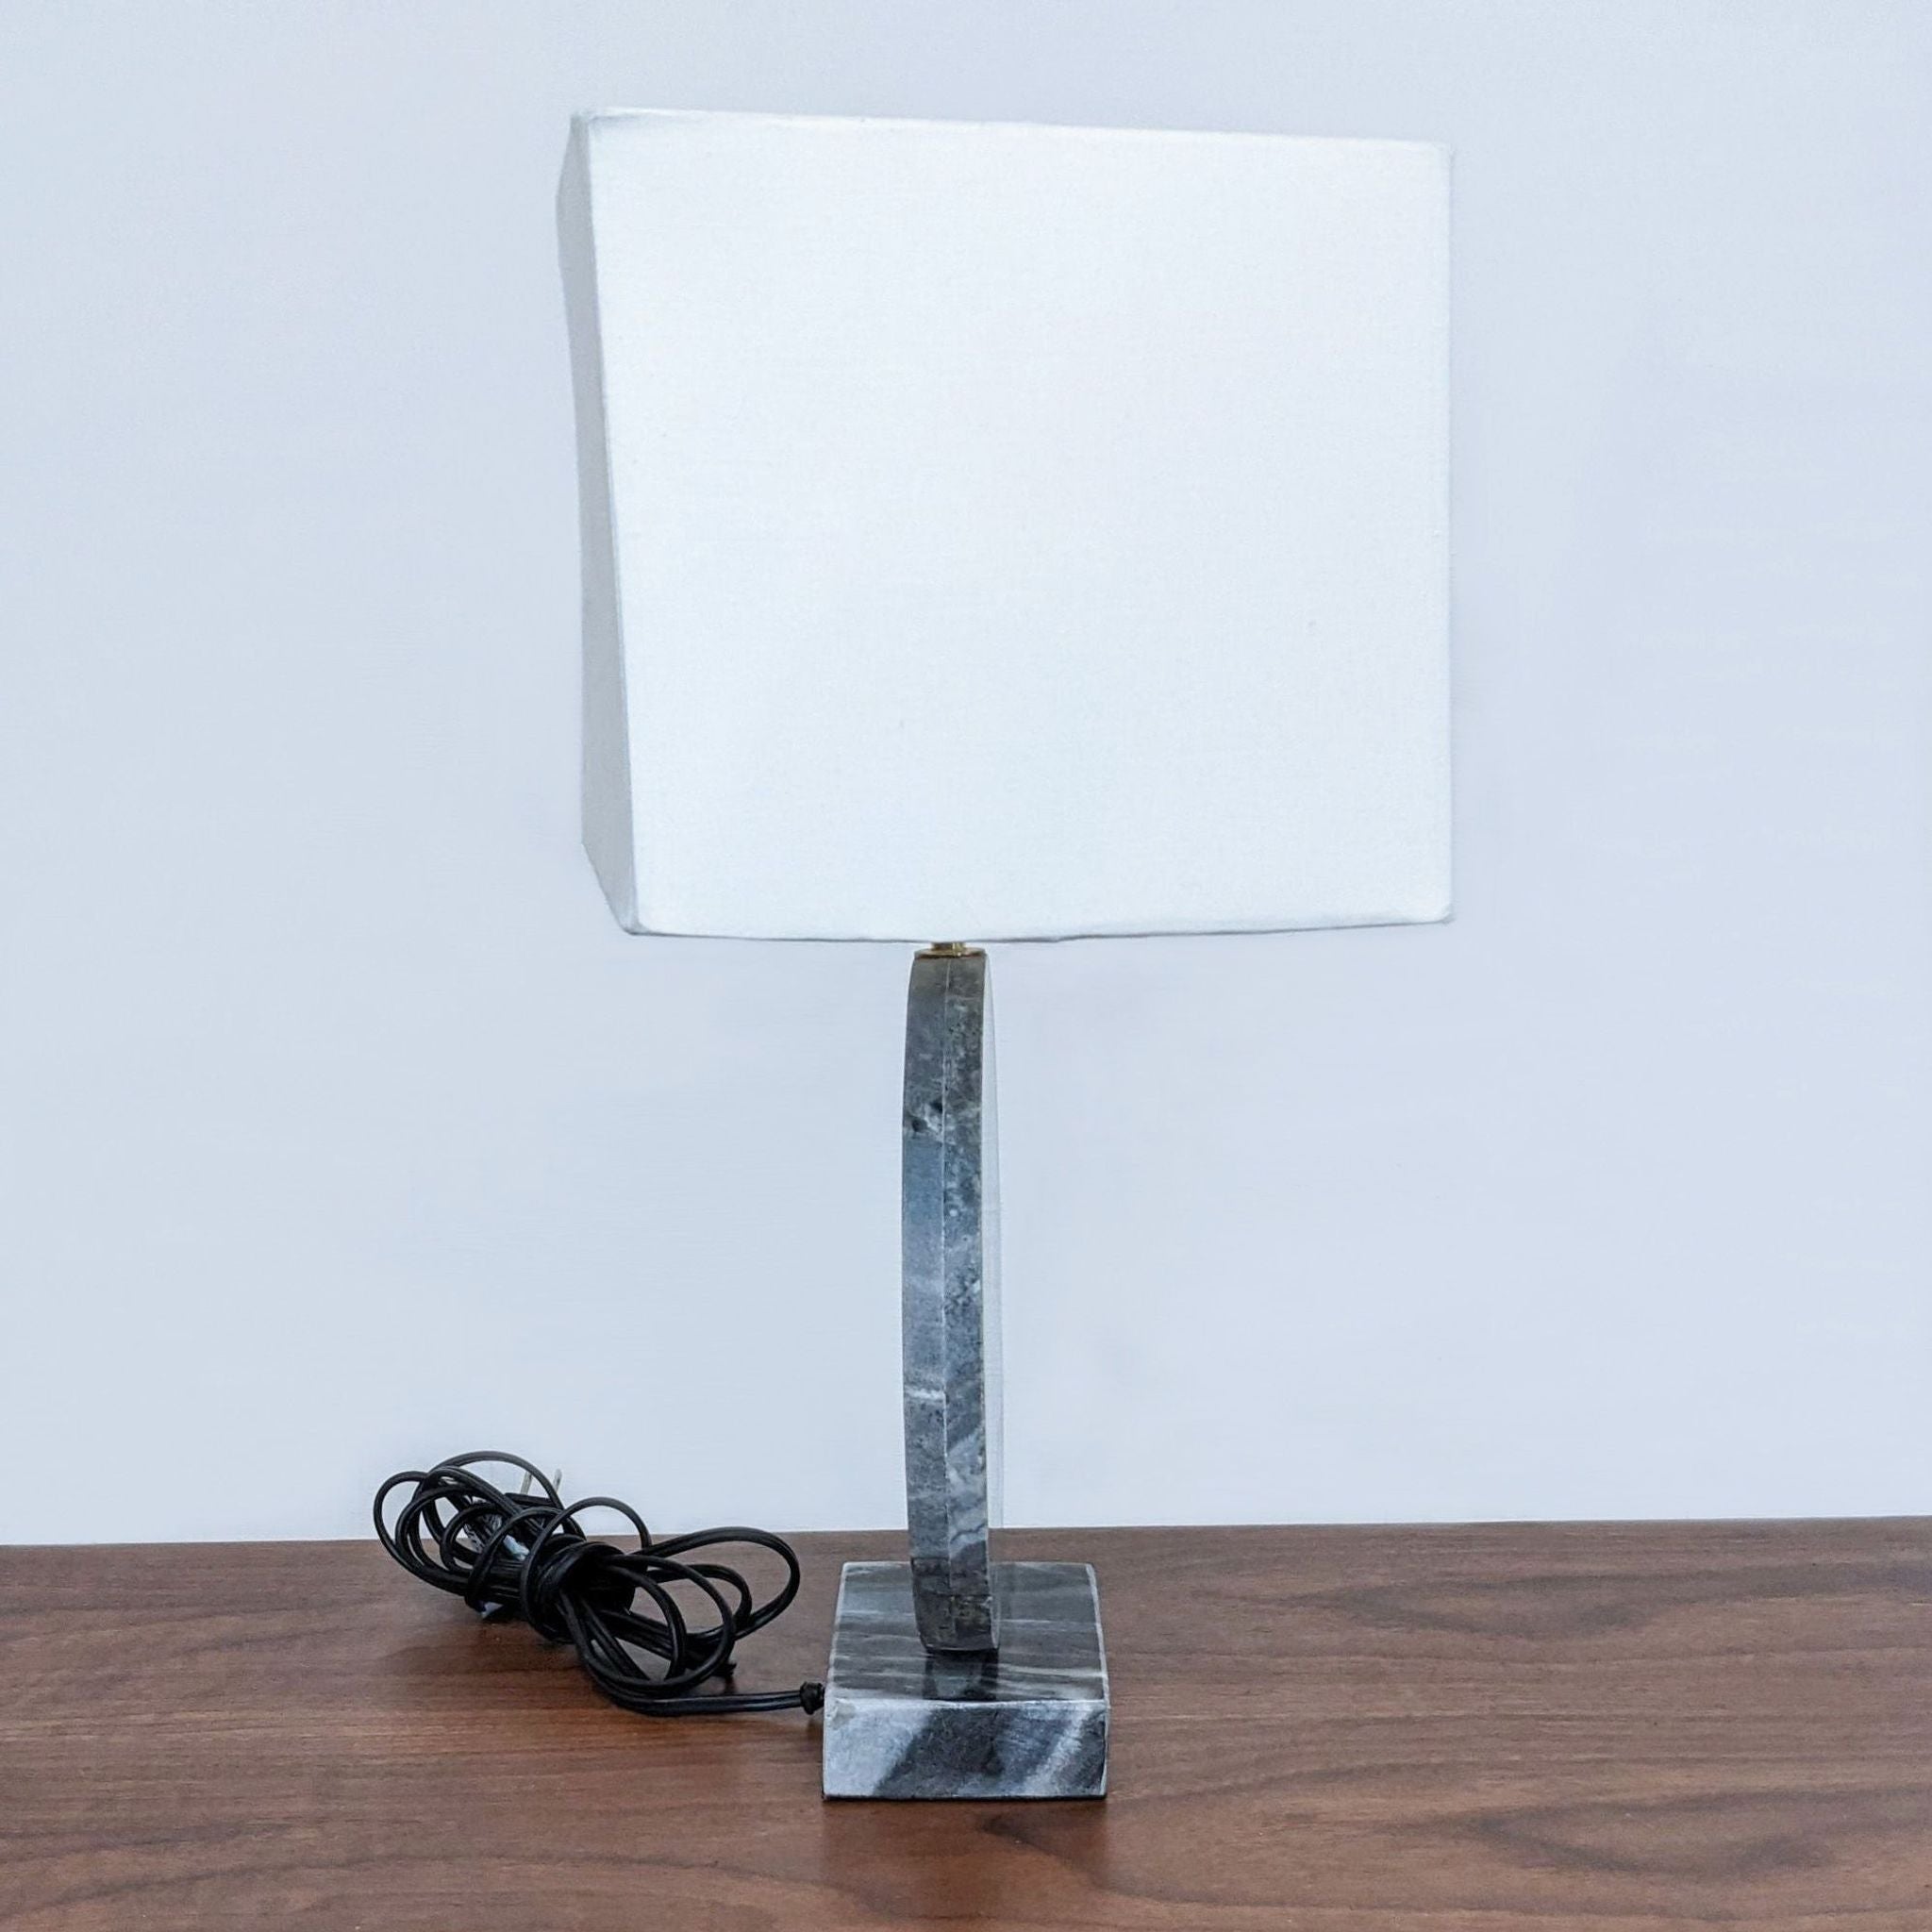 Reperch brand table lamp with a square white shade and marbled base on a wooden surface with coiled black cord.